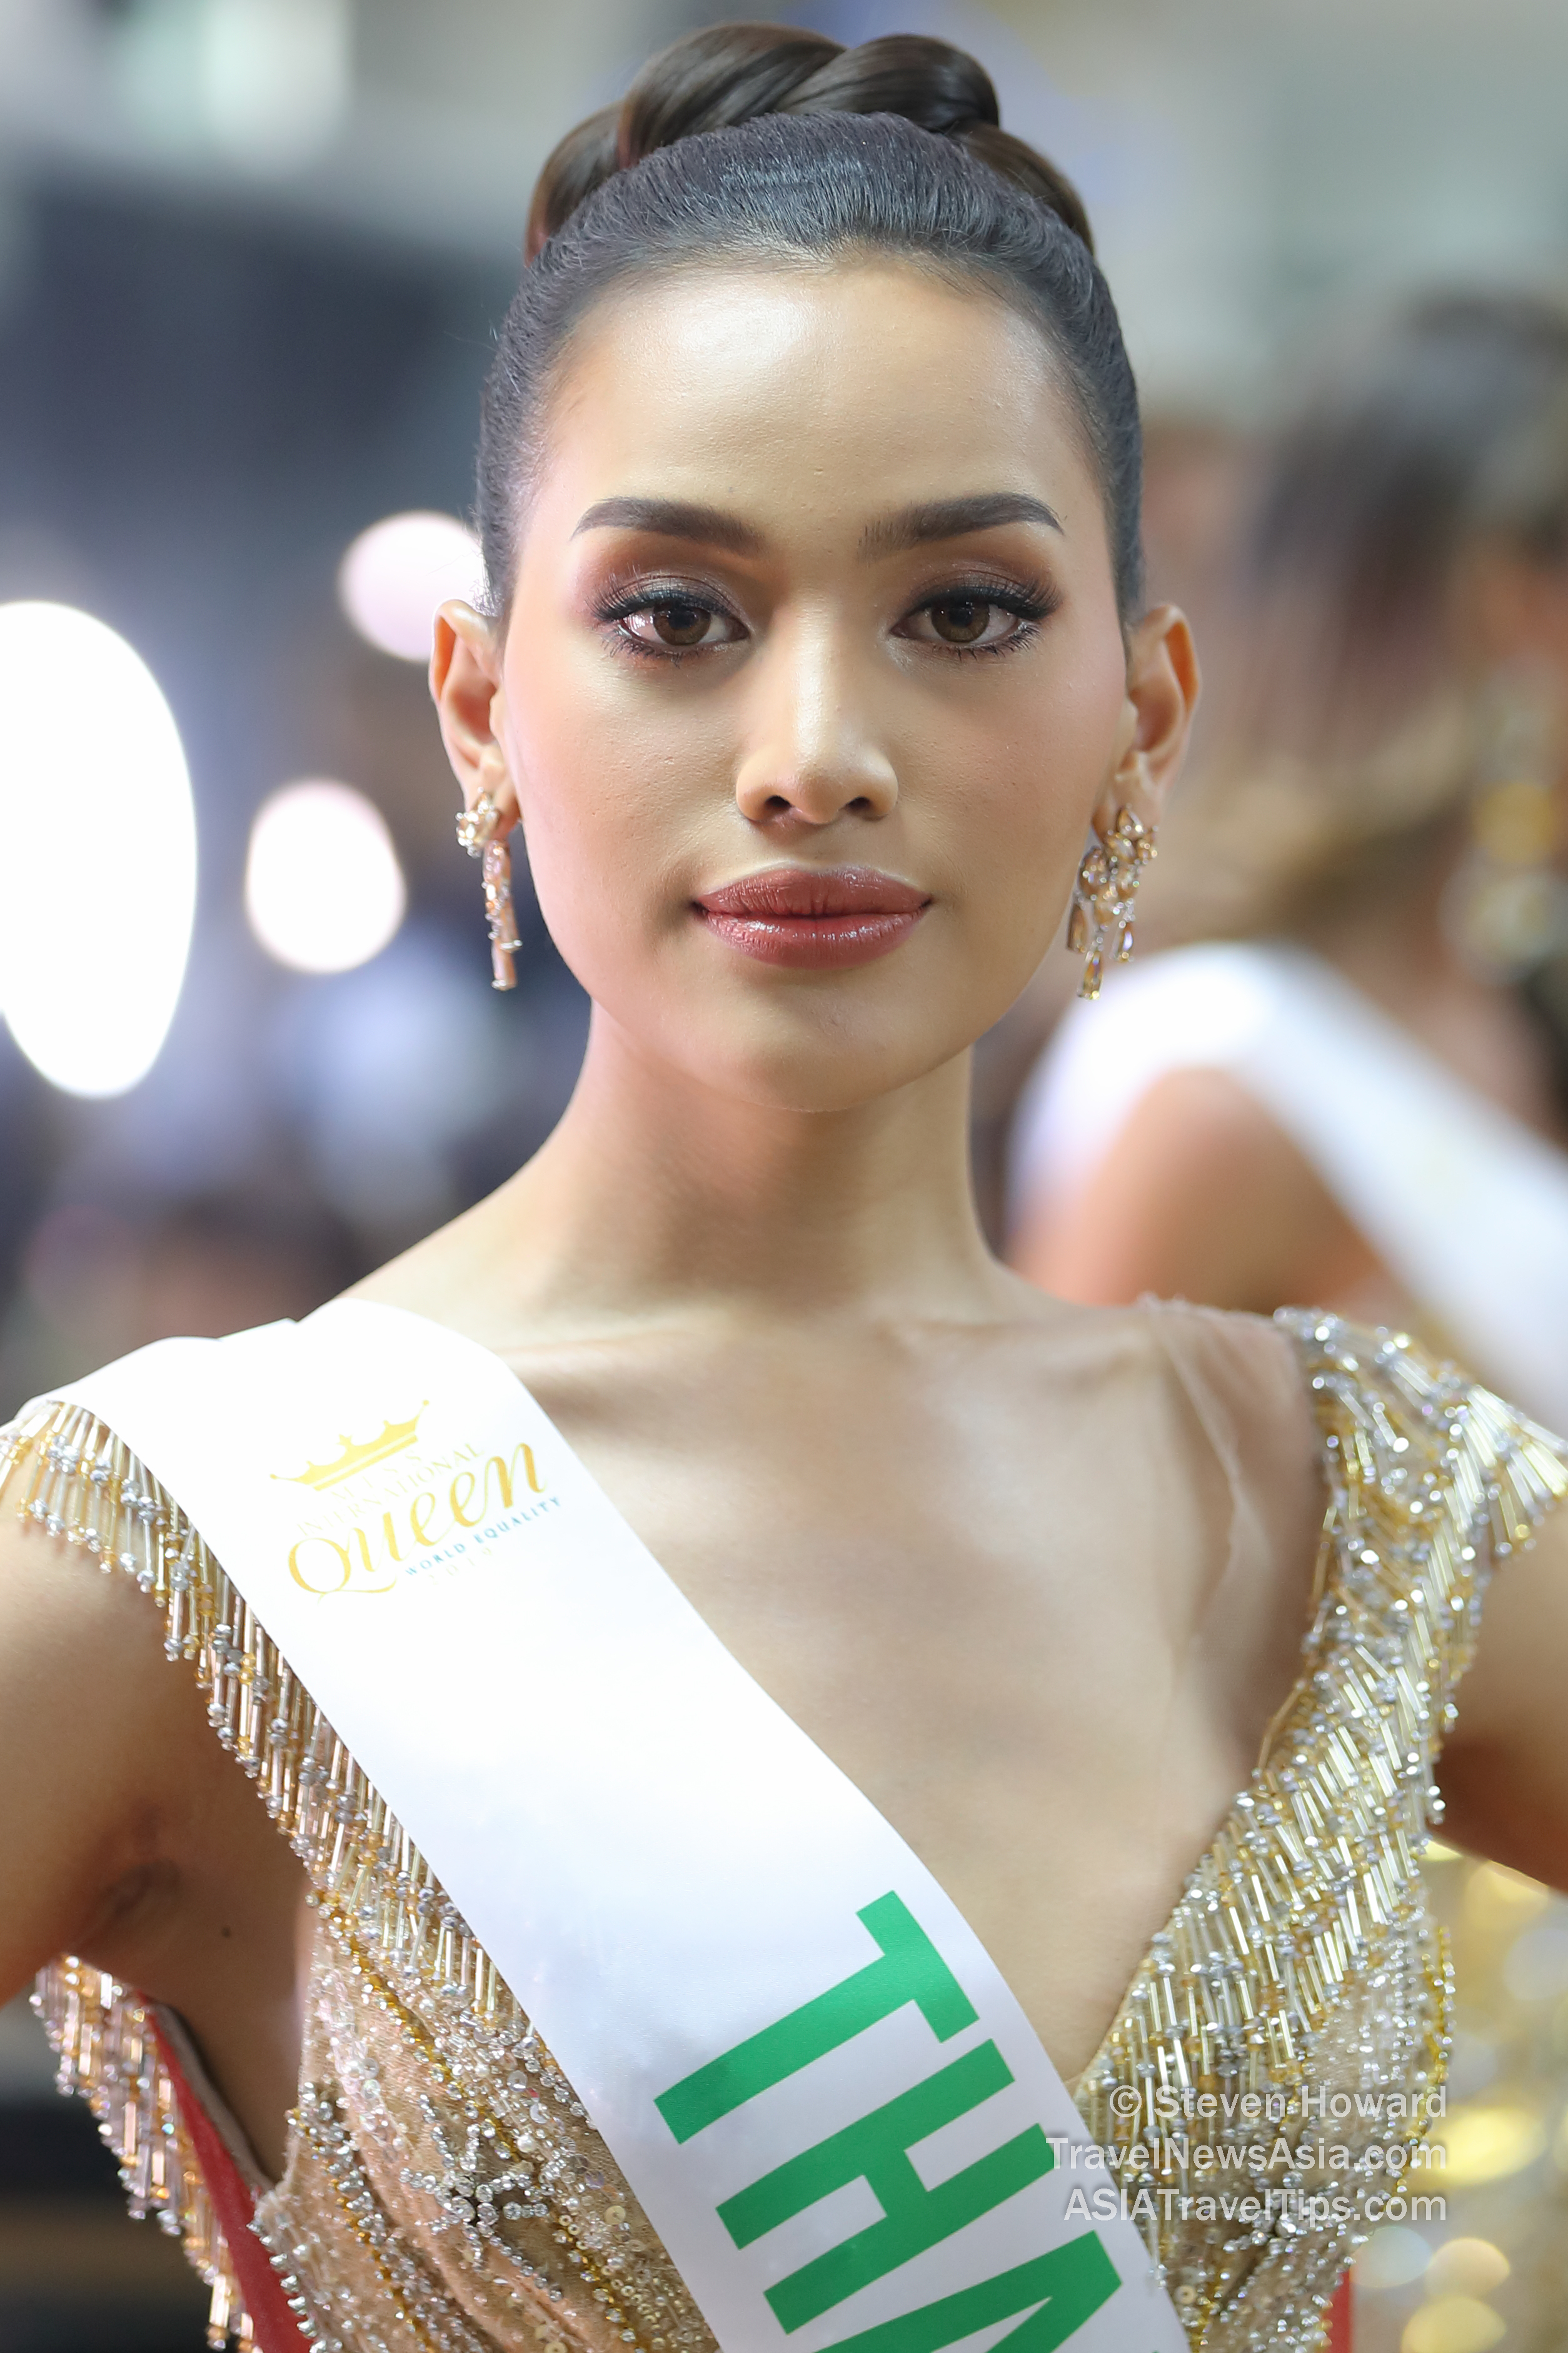 Pictures of Miss International Queen 2019 at Tiffany's Show Pattaya, Thailand